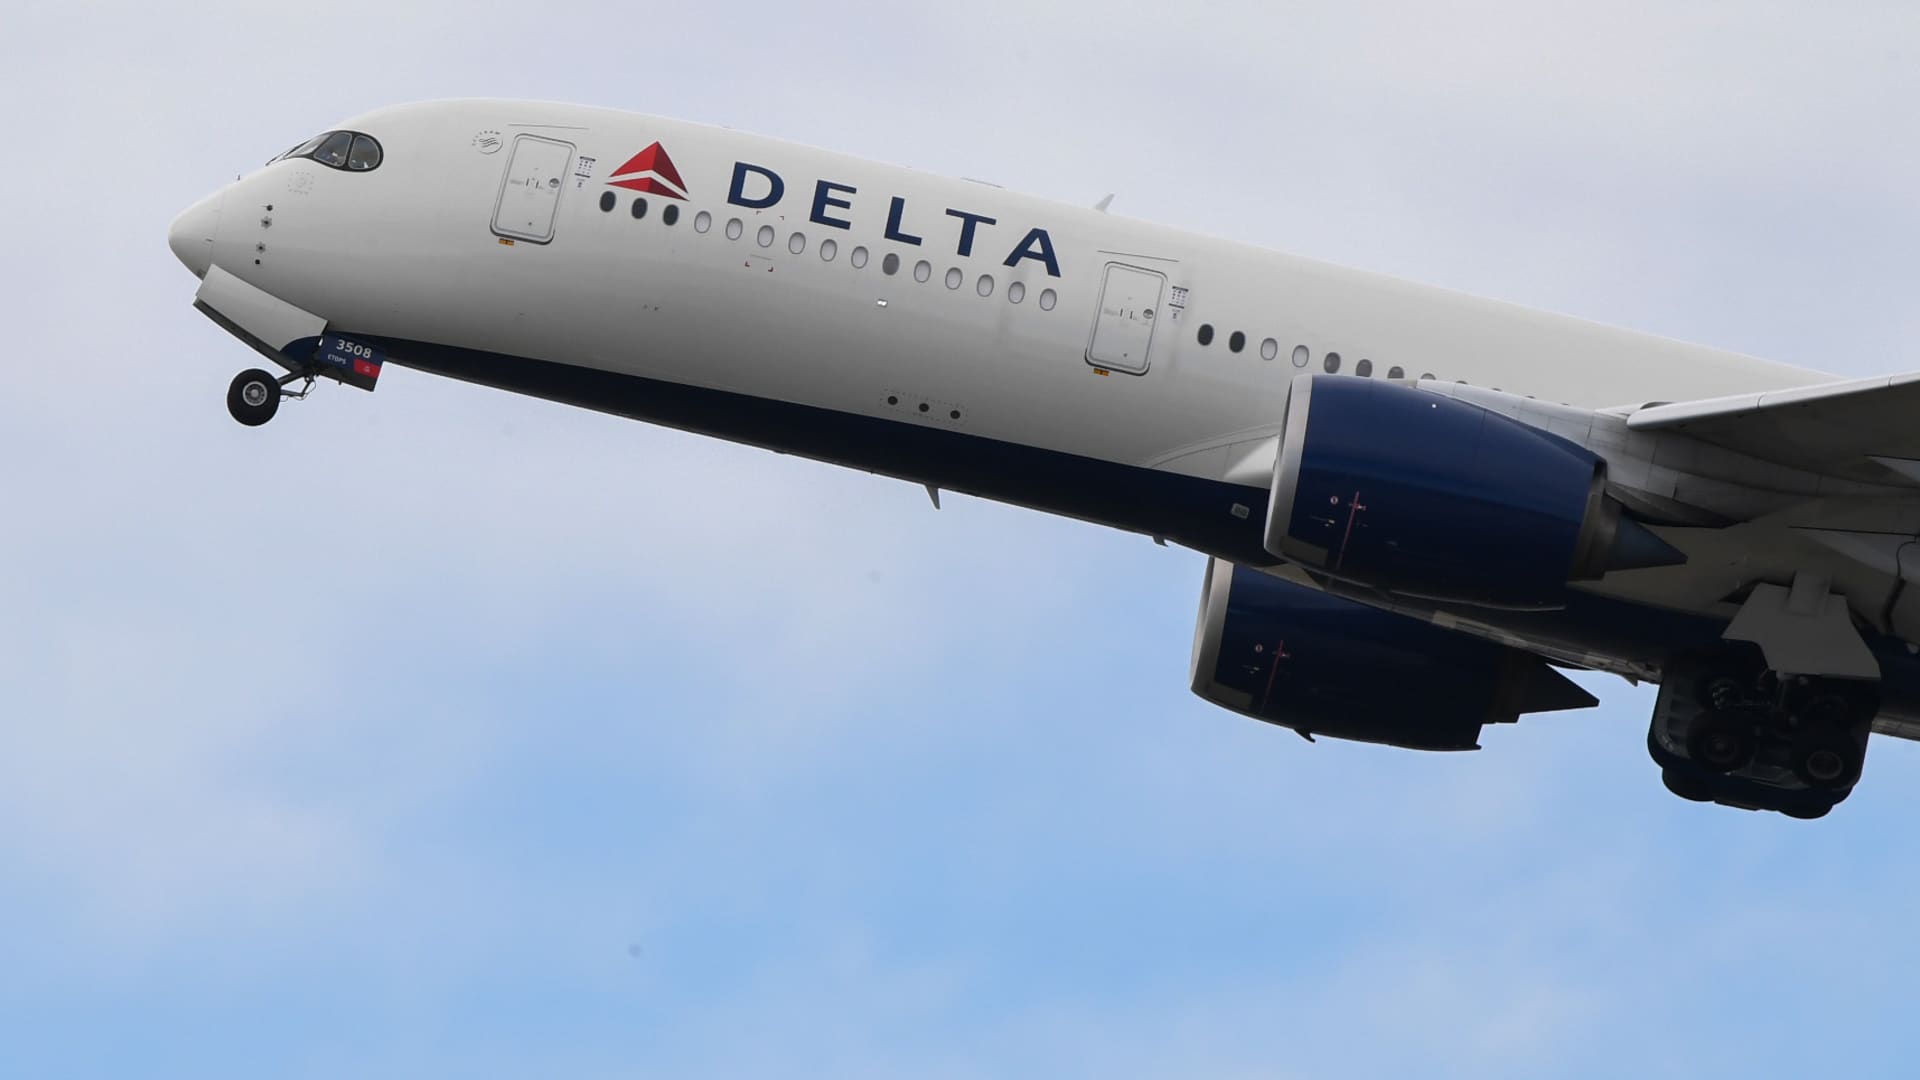 Delta Air Lines (DAL) earnings 3Q 22